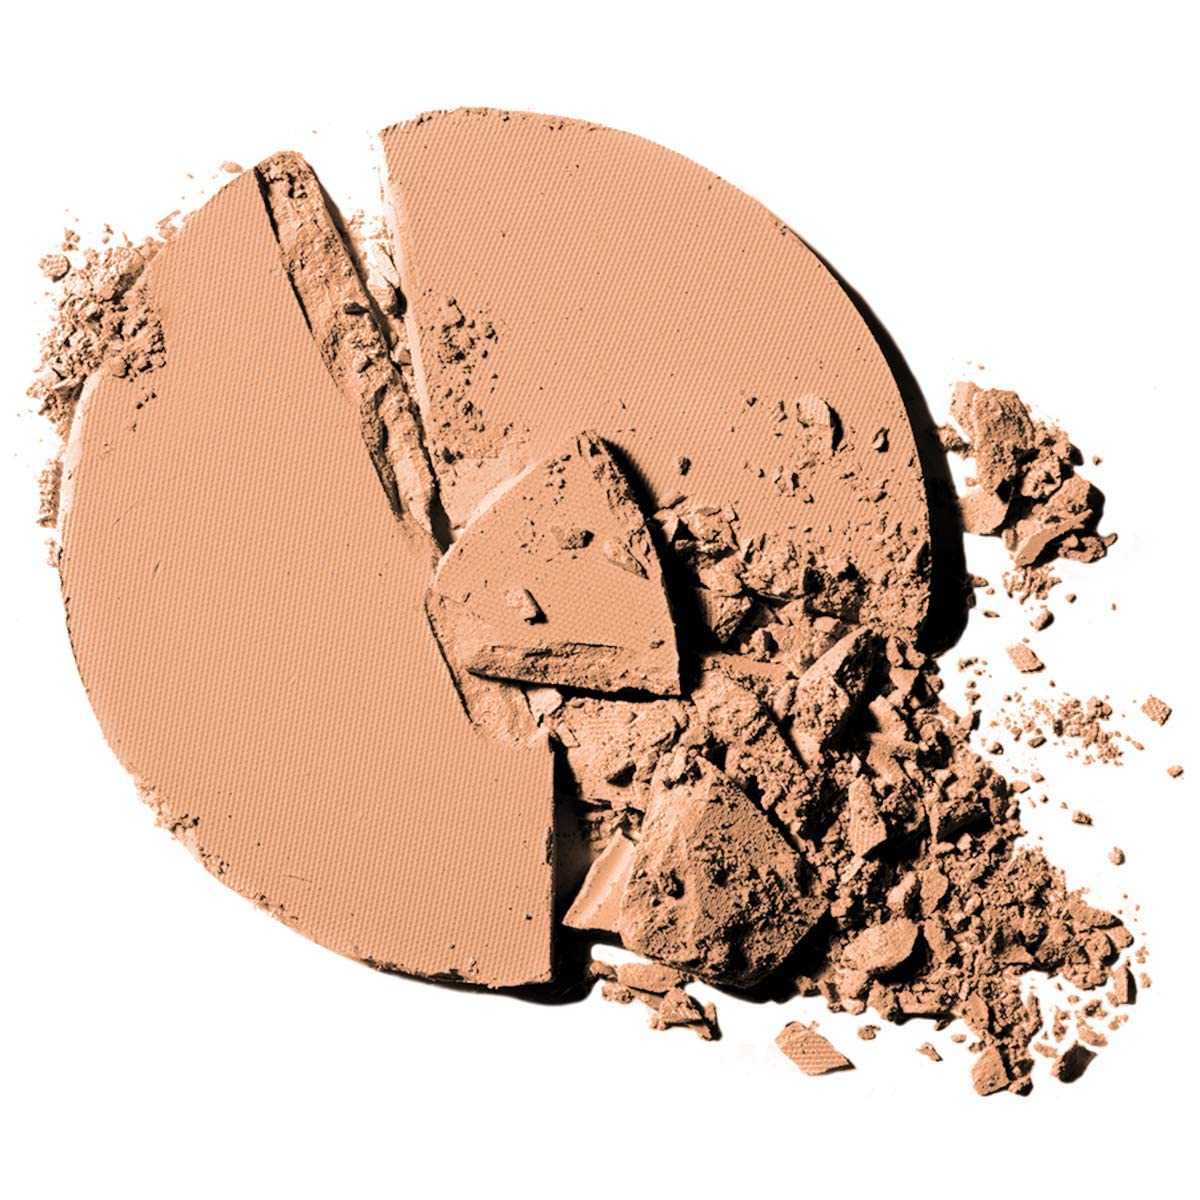 Glo Skin Beauty Pressed Base Powder Foundation Makeup (Beige Light) - Flawless Coverage for a Radiant Natural. Second-Skin Finish